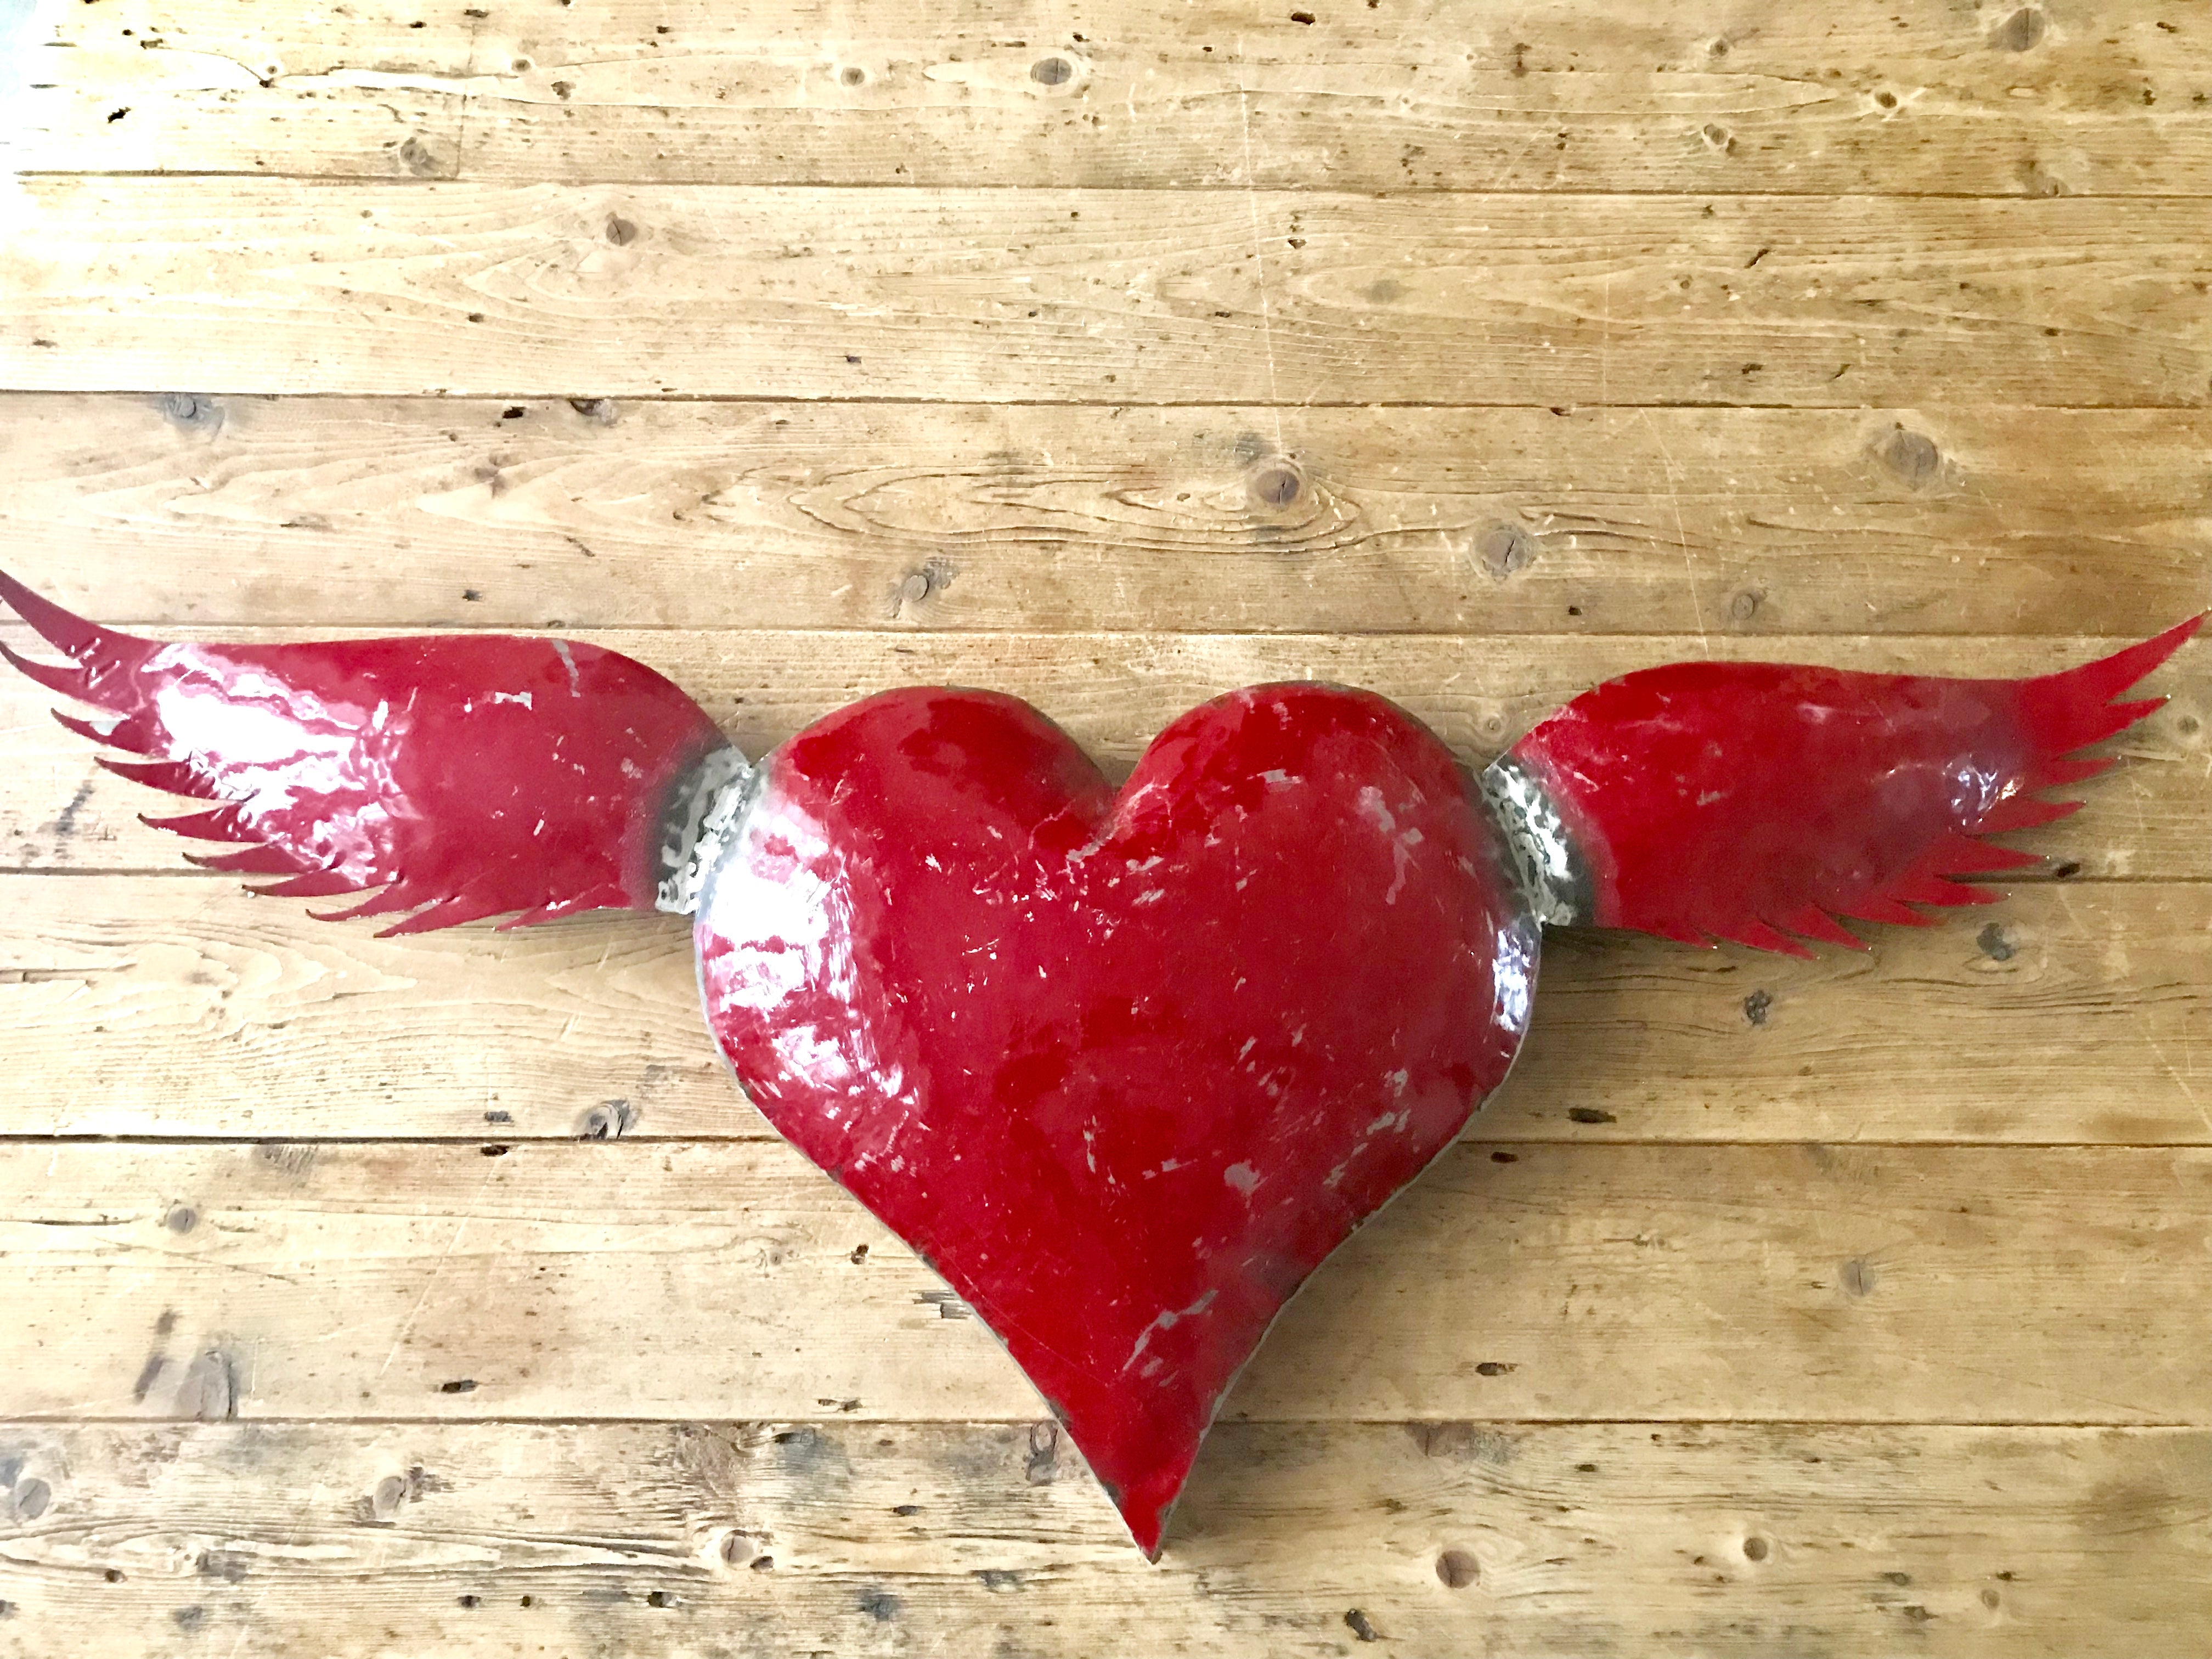 Large Recycled Metal Heart with Red Wings - Wall Art